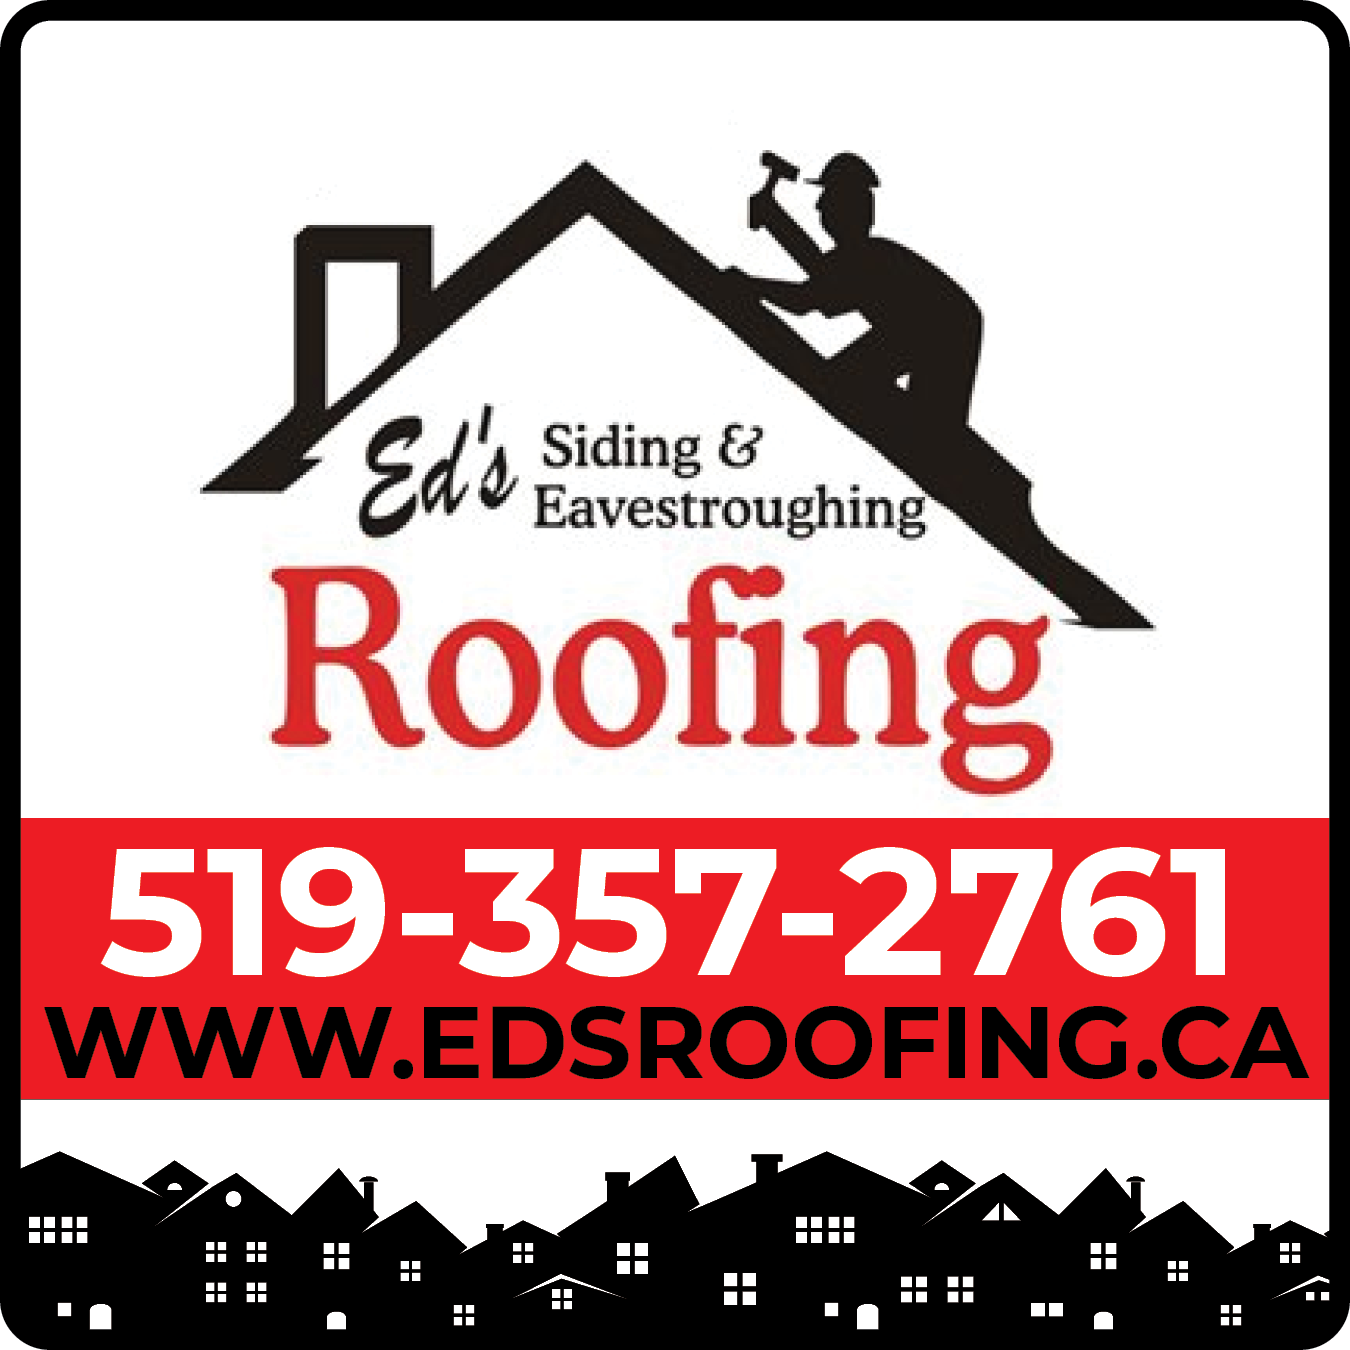 Ed's Roofing